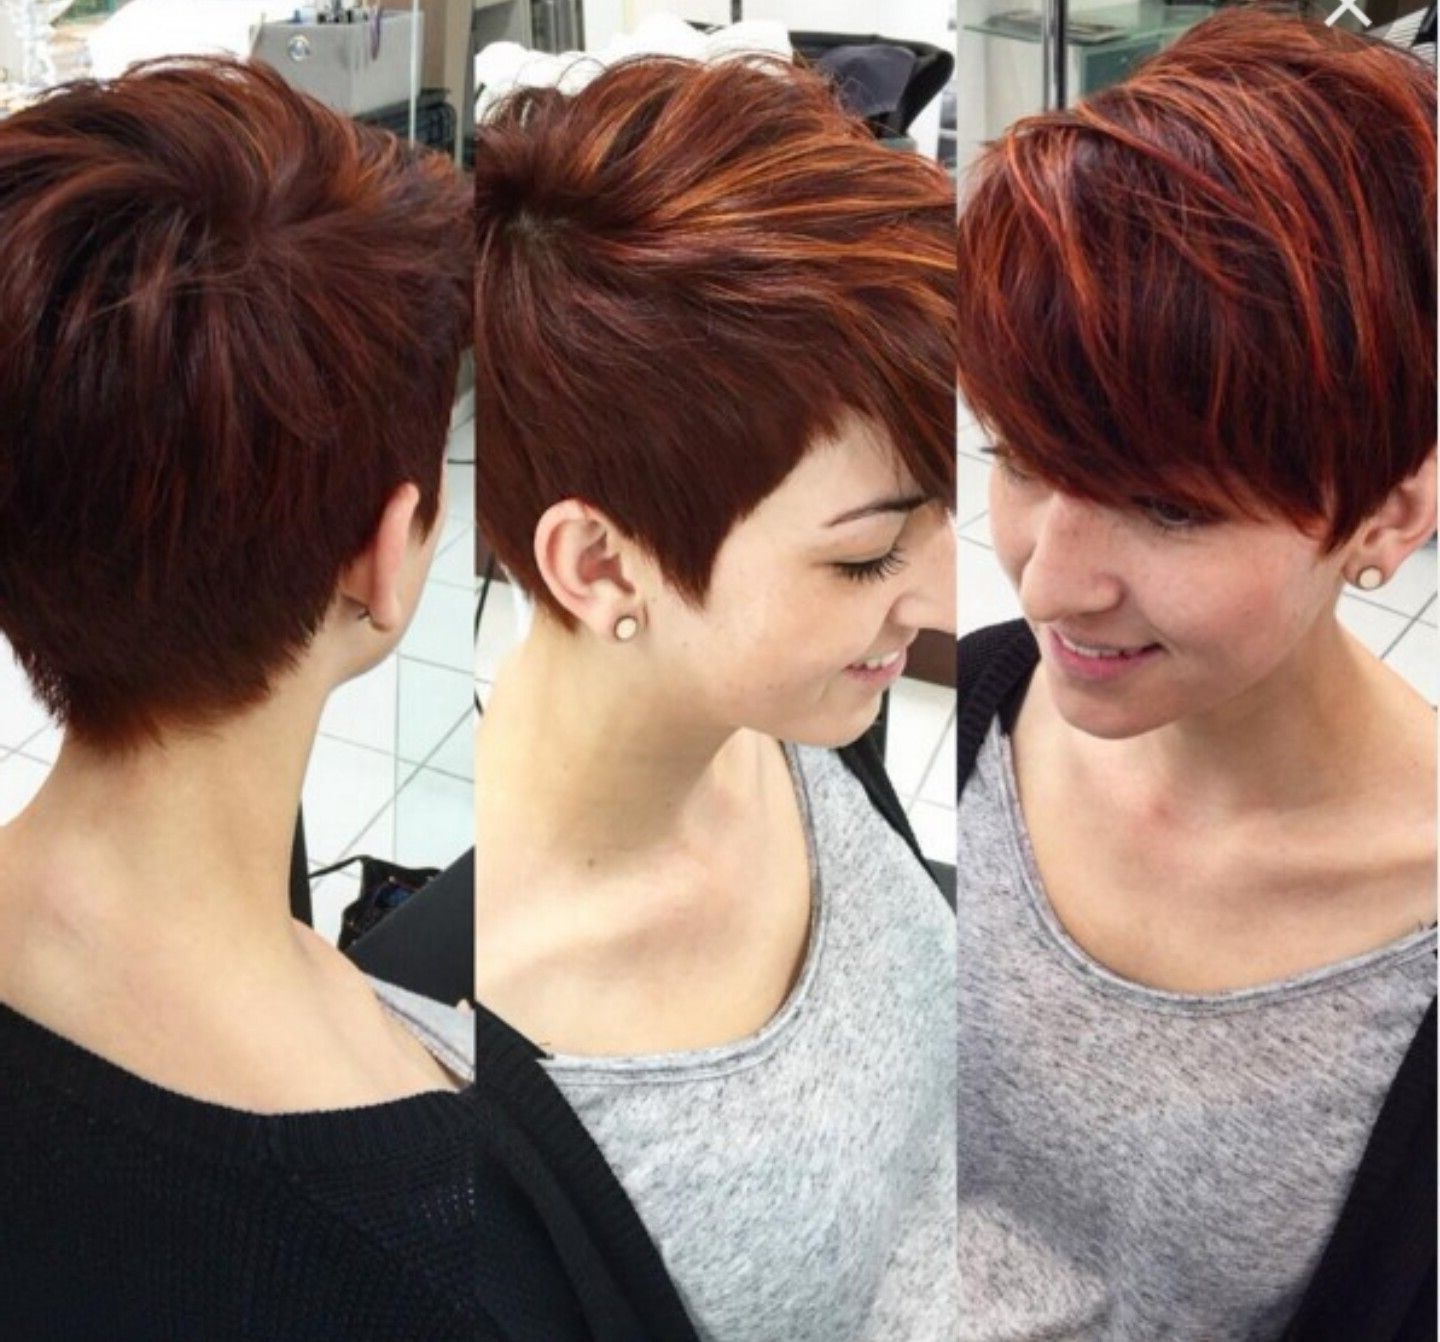 Caramel Colored Pixie With Long Side Bangs | Hair | Pinterest Inside Most Popular Short Pixie Hairstyles With Long Bangs (View 2 of 15)